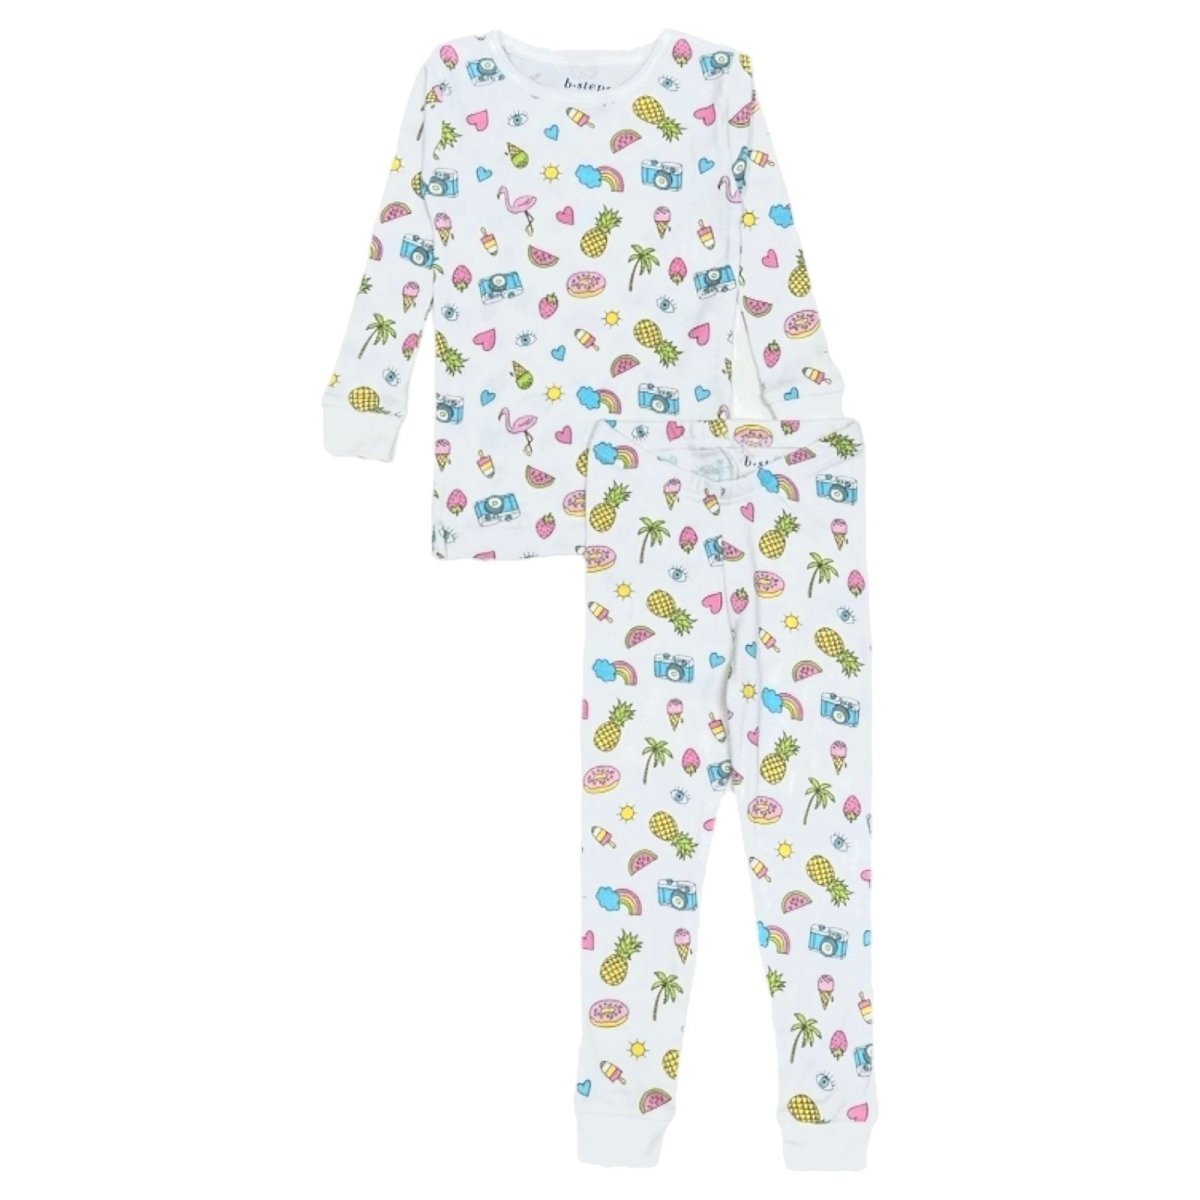 ICONS DOODLE TWO PIECE PJS - BABY STEPS